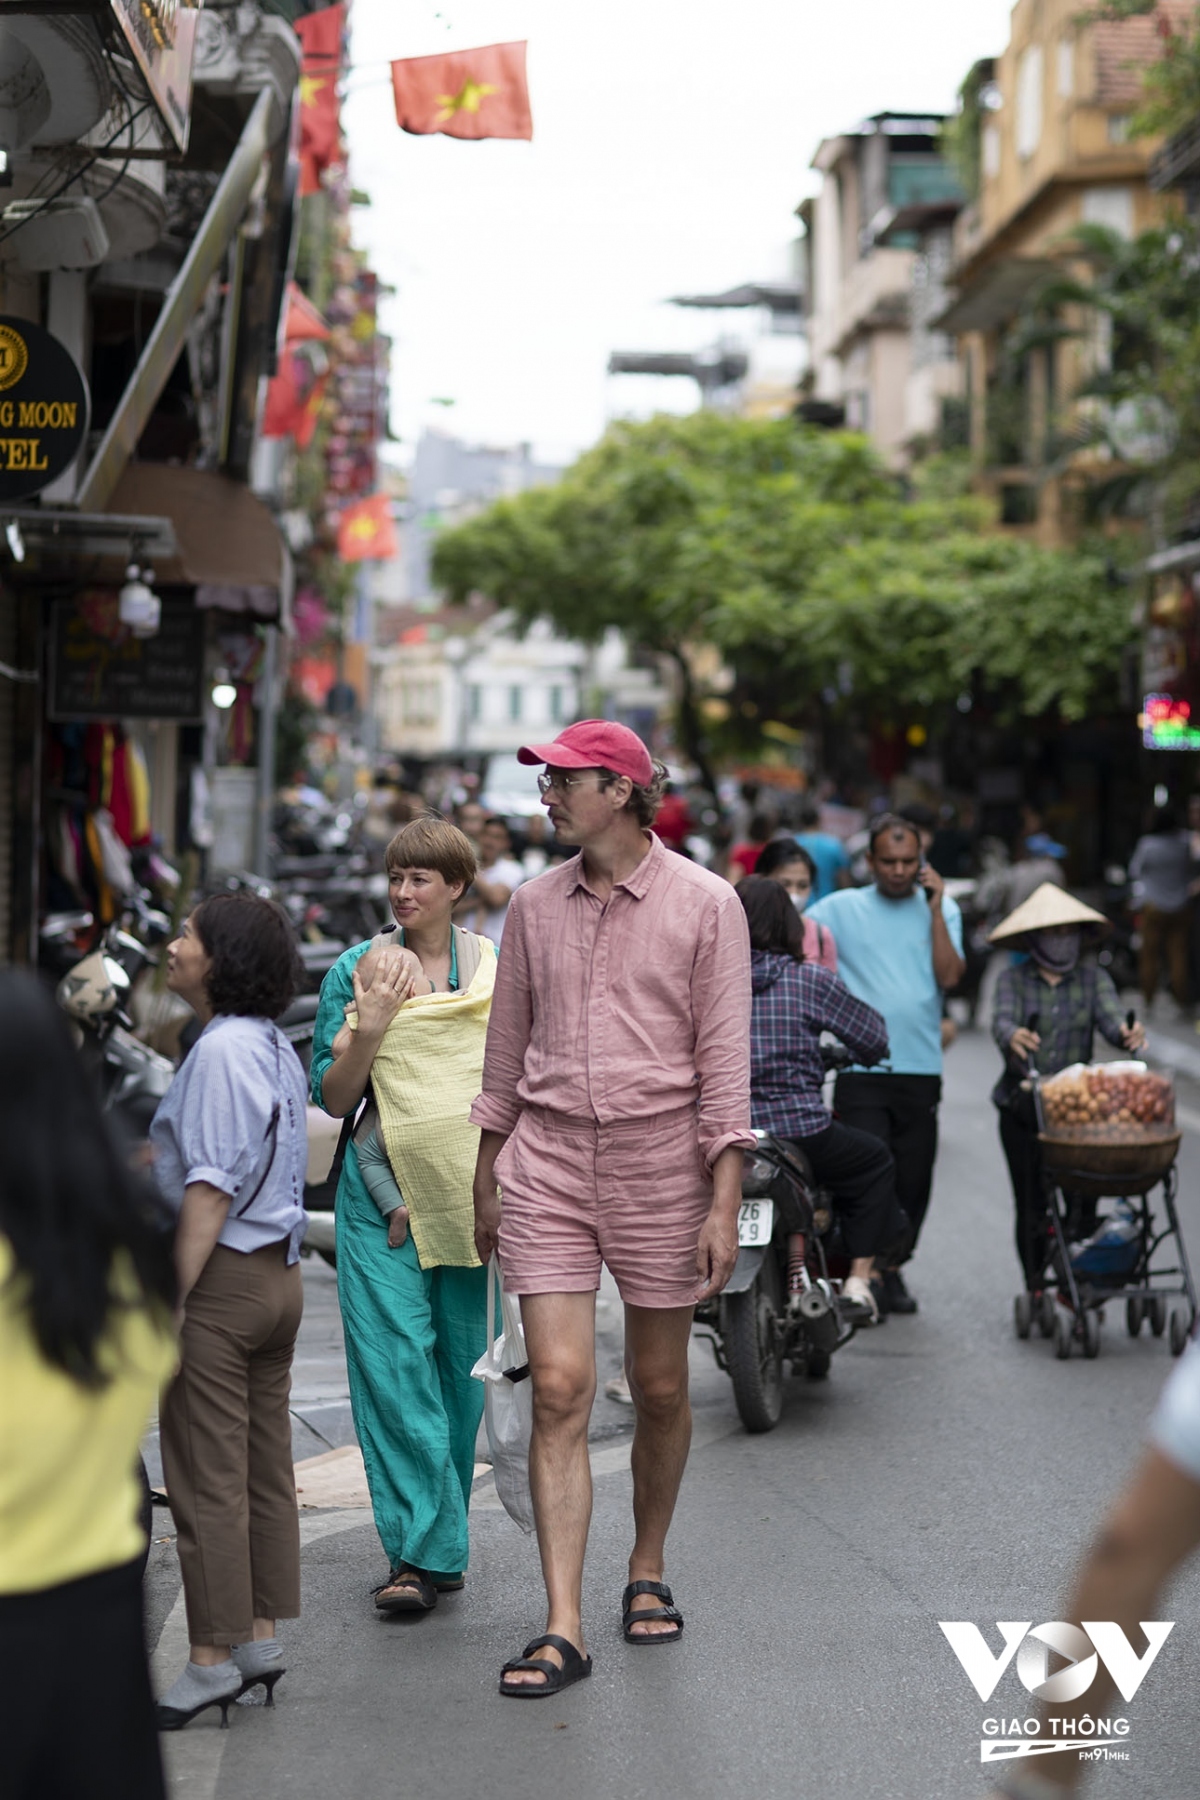 Old Quarter bustles with trade once more in Hanoi